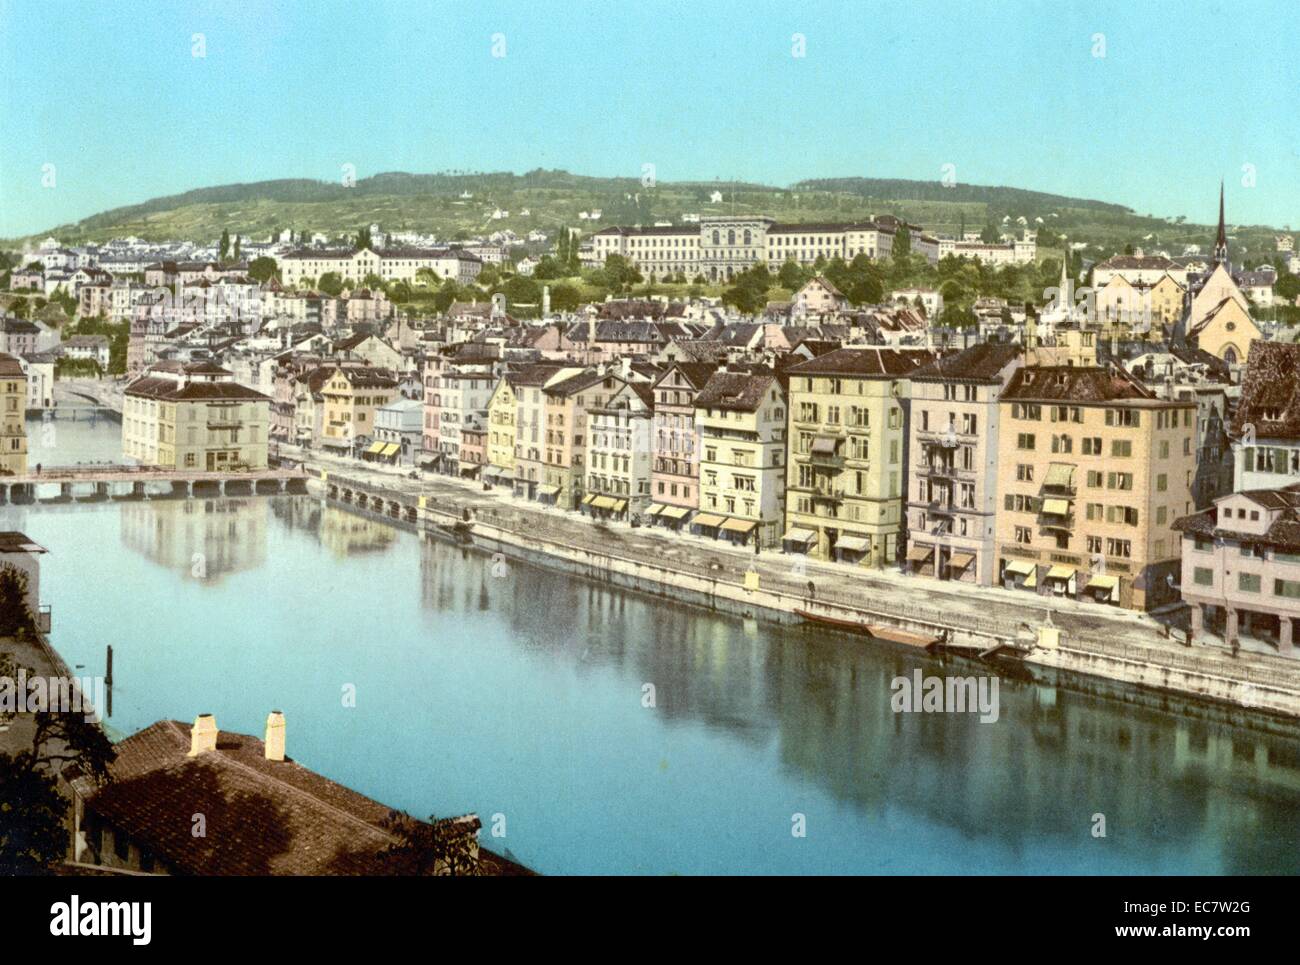 Early colour photograph of a river scene in Zurich, Switzerland. Shot between 1890 and 1900. Stock Photo